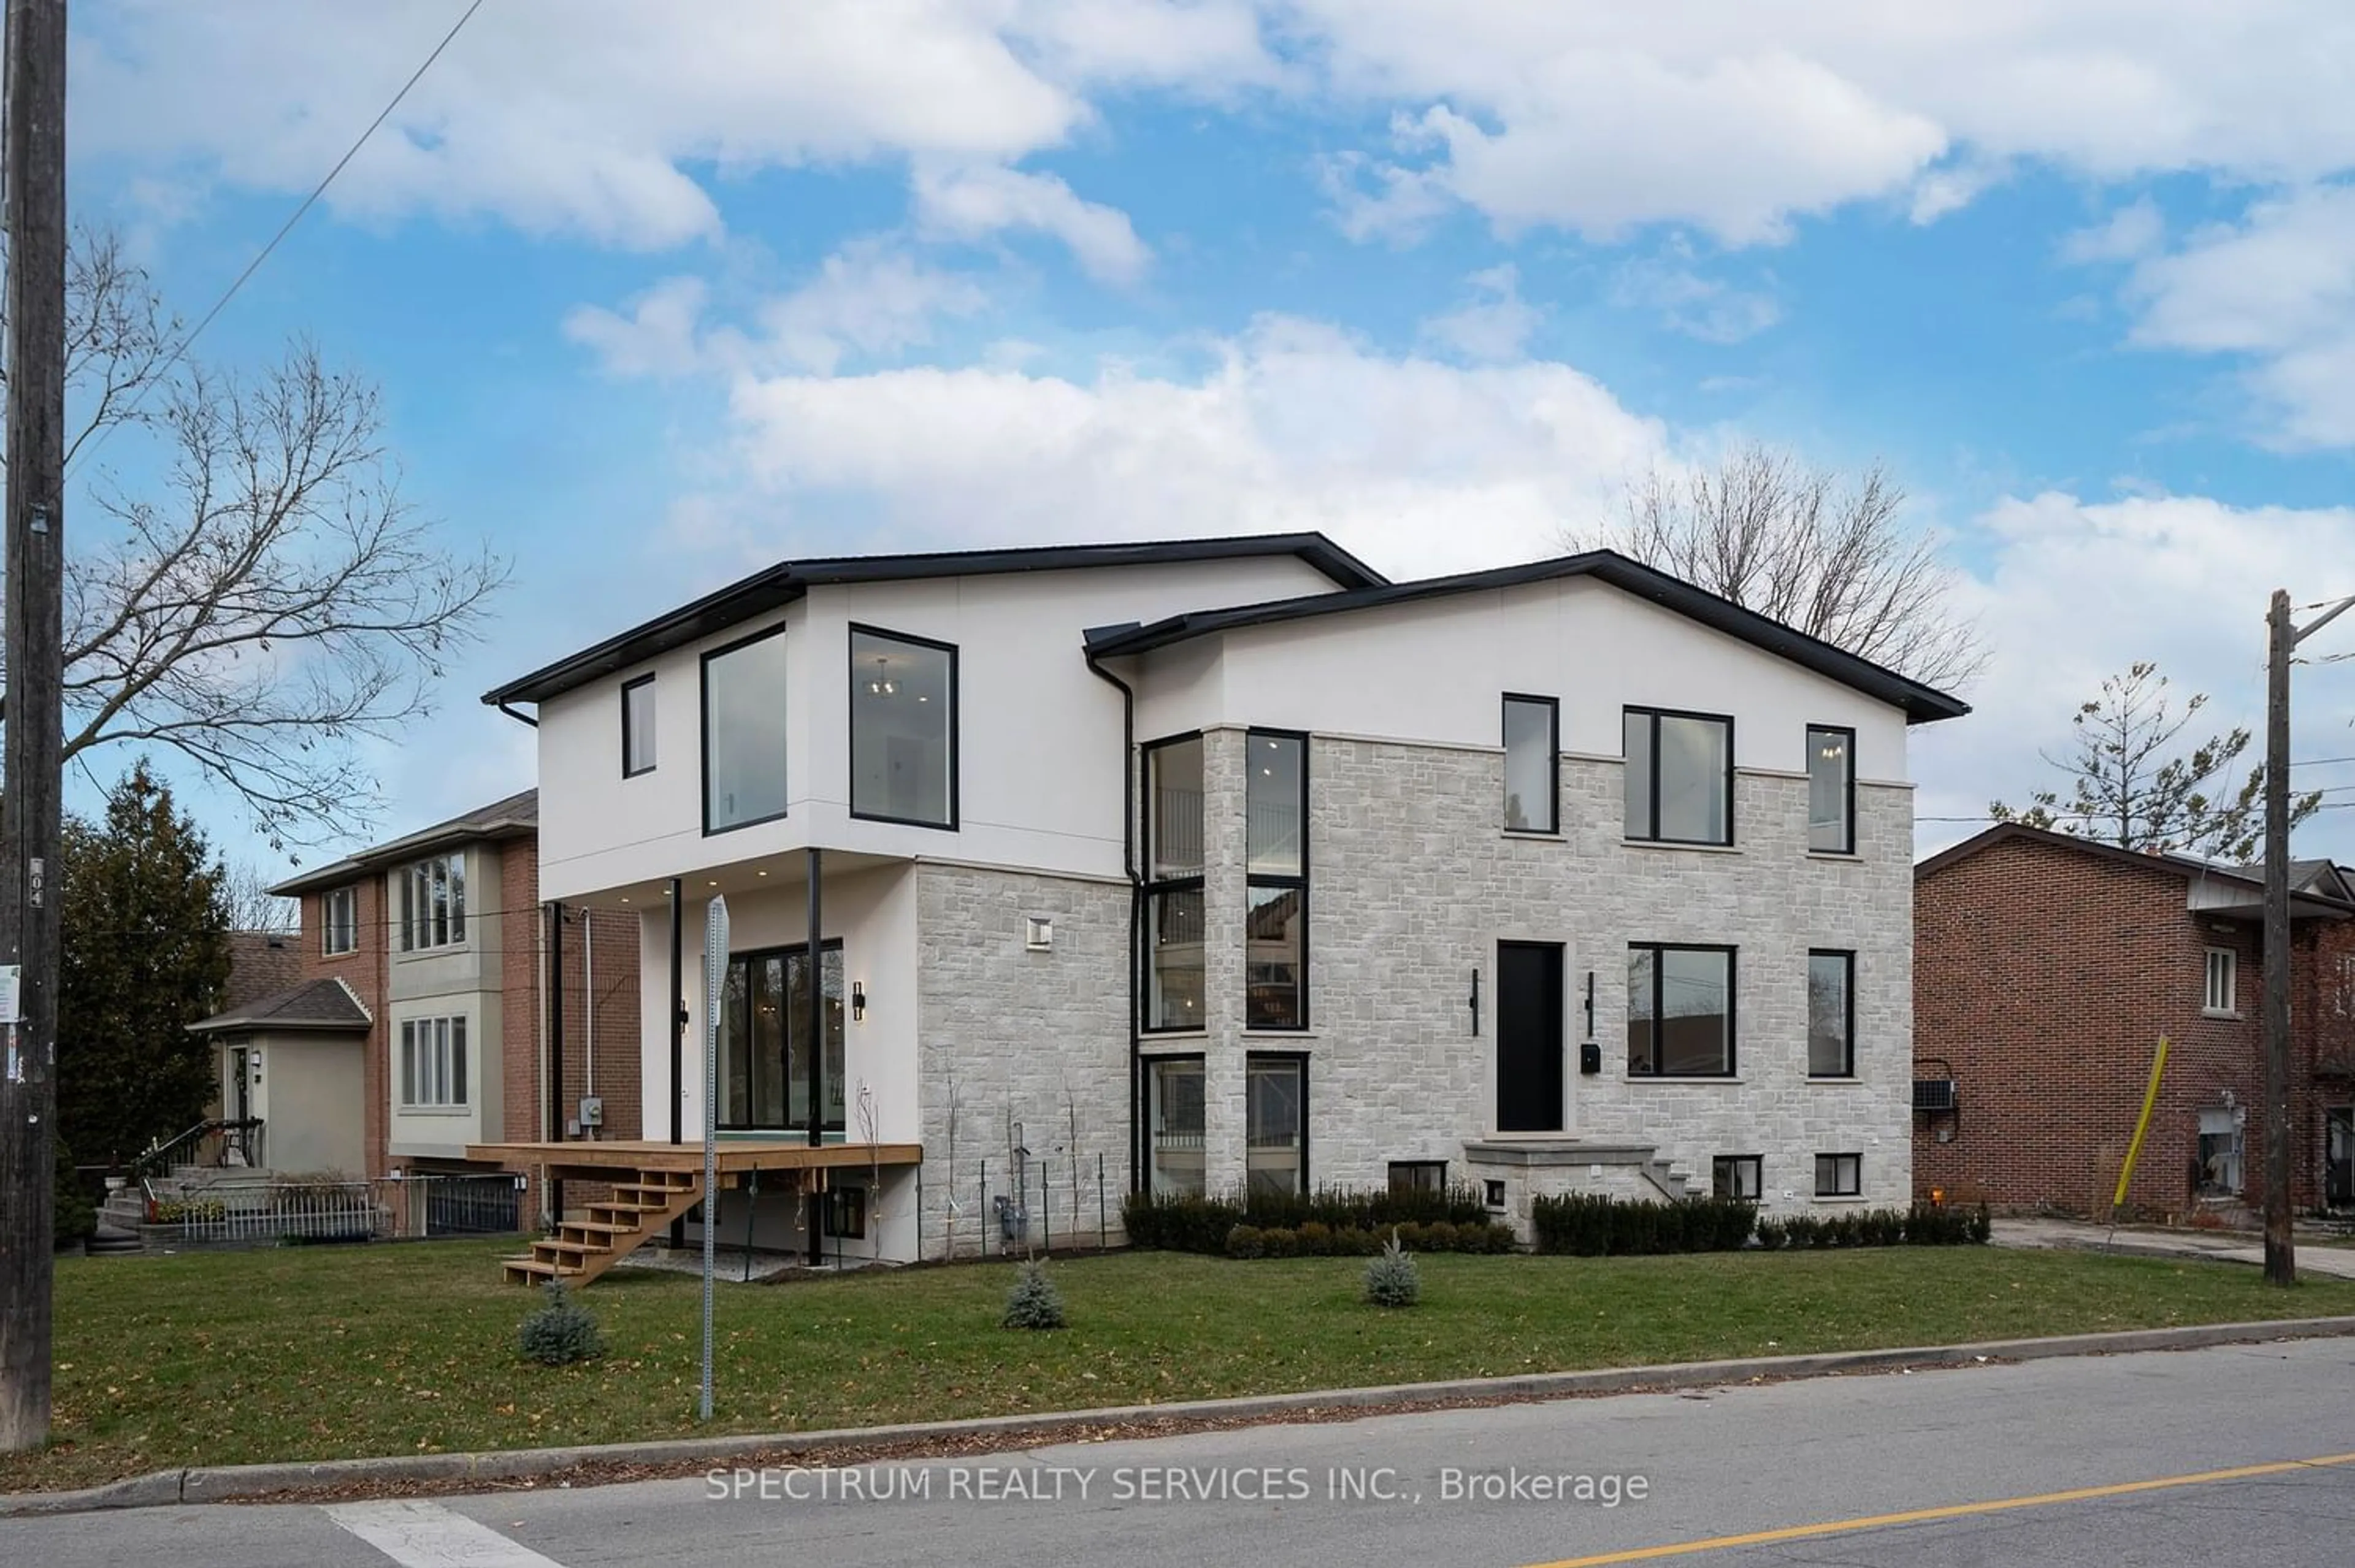 Home with brick exterior material for 102 Stayner Ave, Toronto Ontario M6B 1P2